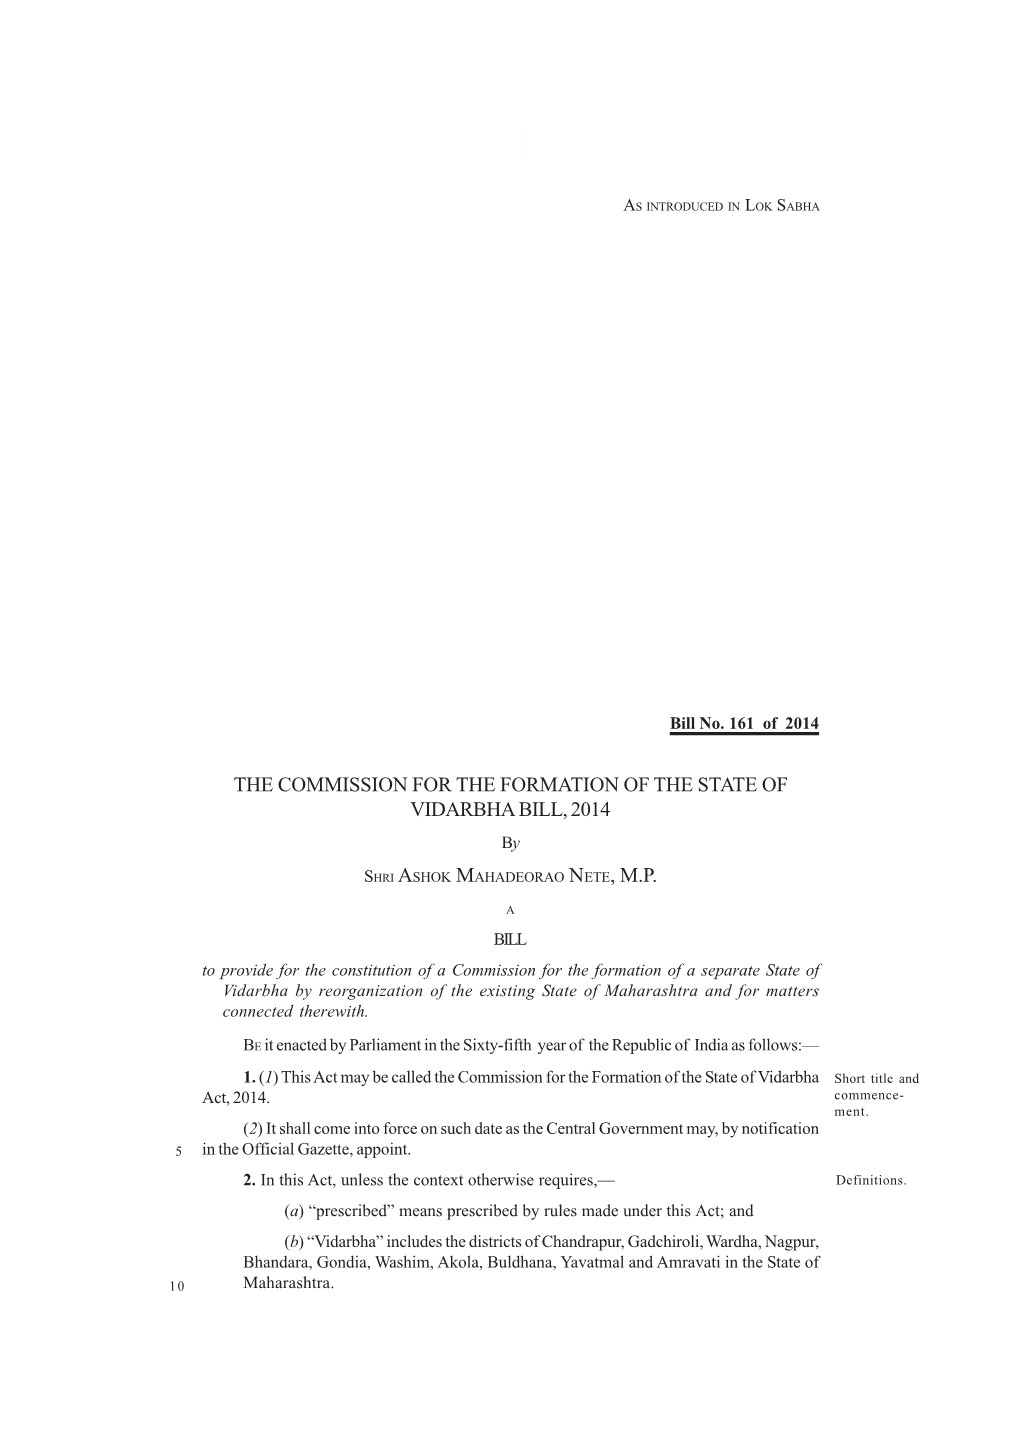 THE COMMISSION for the FORMATION of the STATE of VIDARBHA BILL, 2014 By